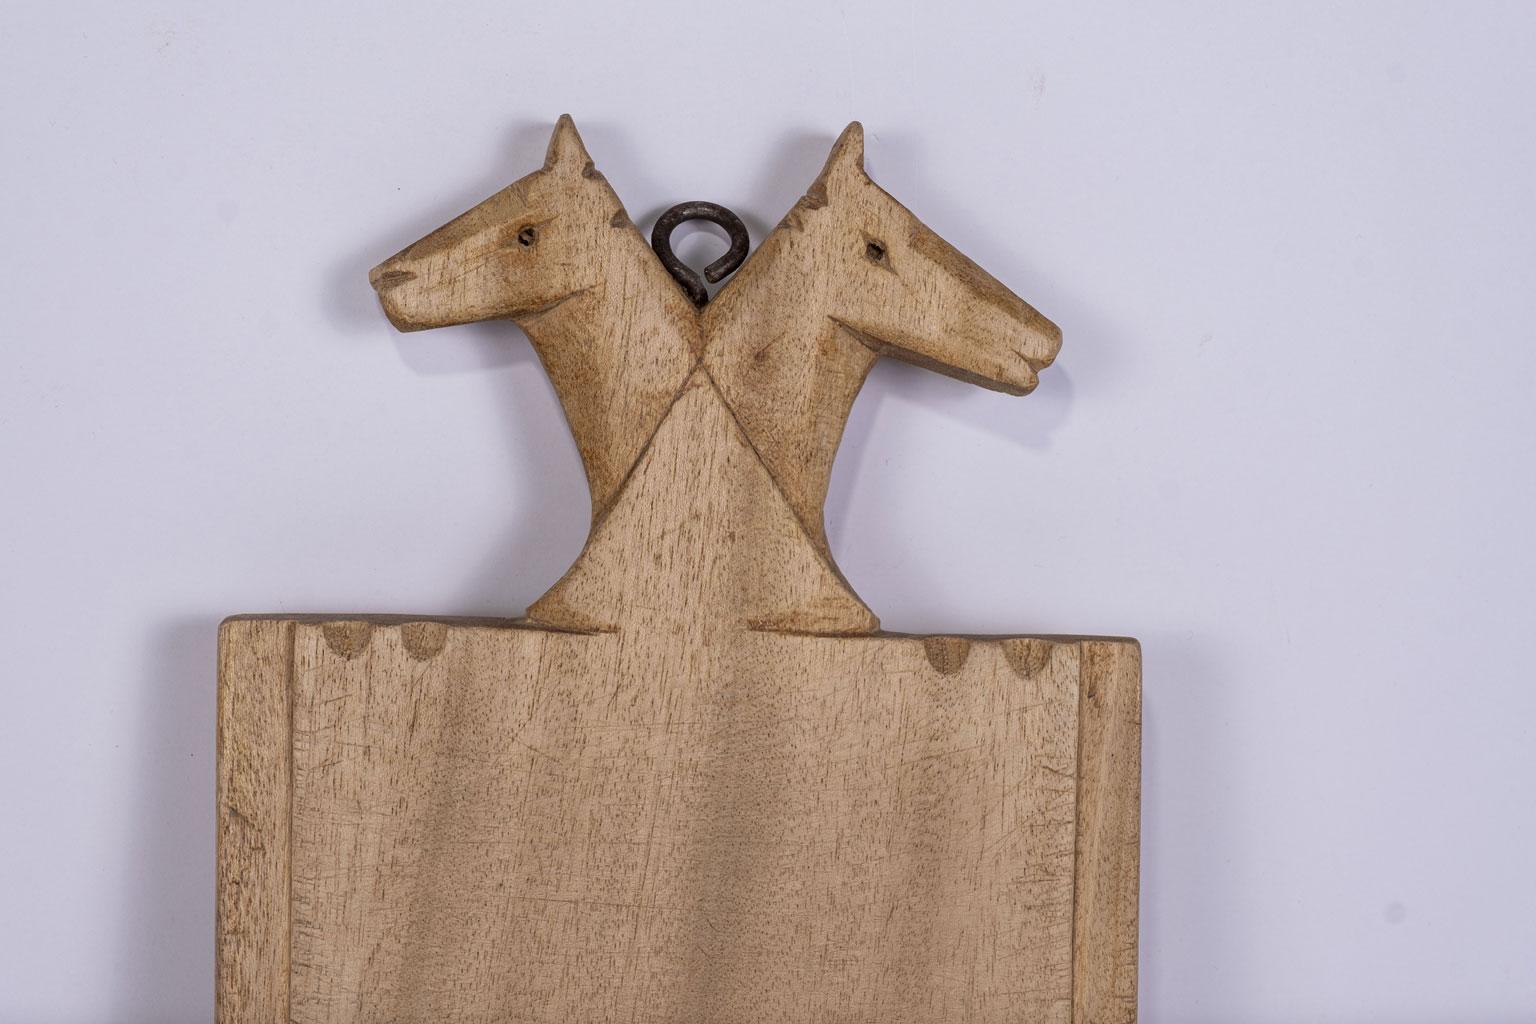 Horse head crested French cutting board dating to the mid-to-early 20th century. Double horse head motif crest hand-carved at top of board.